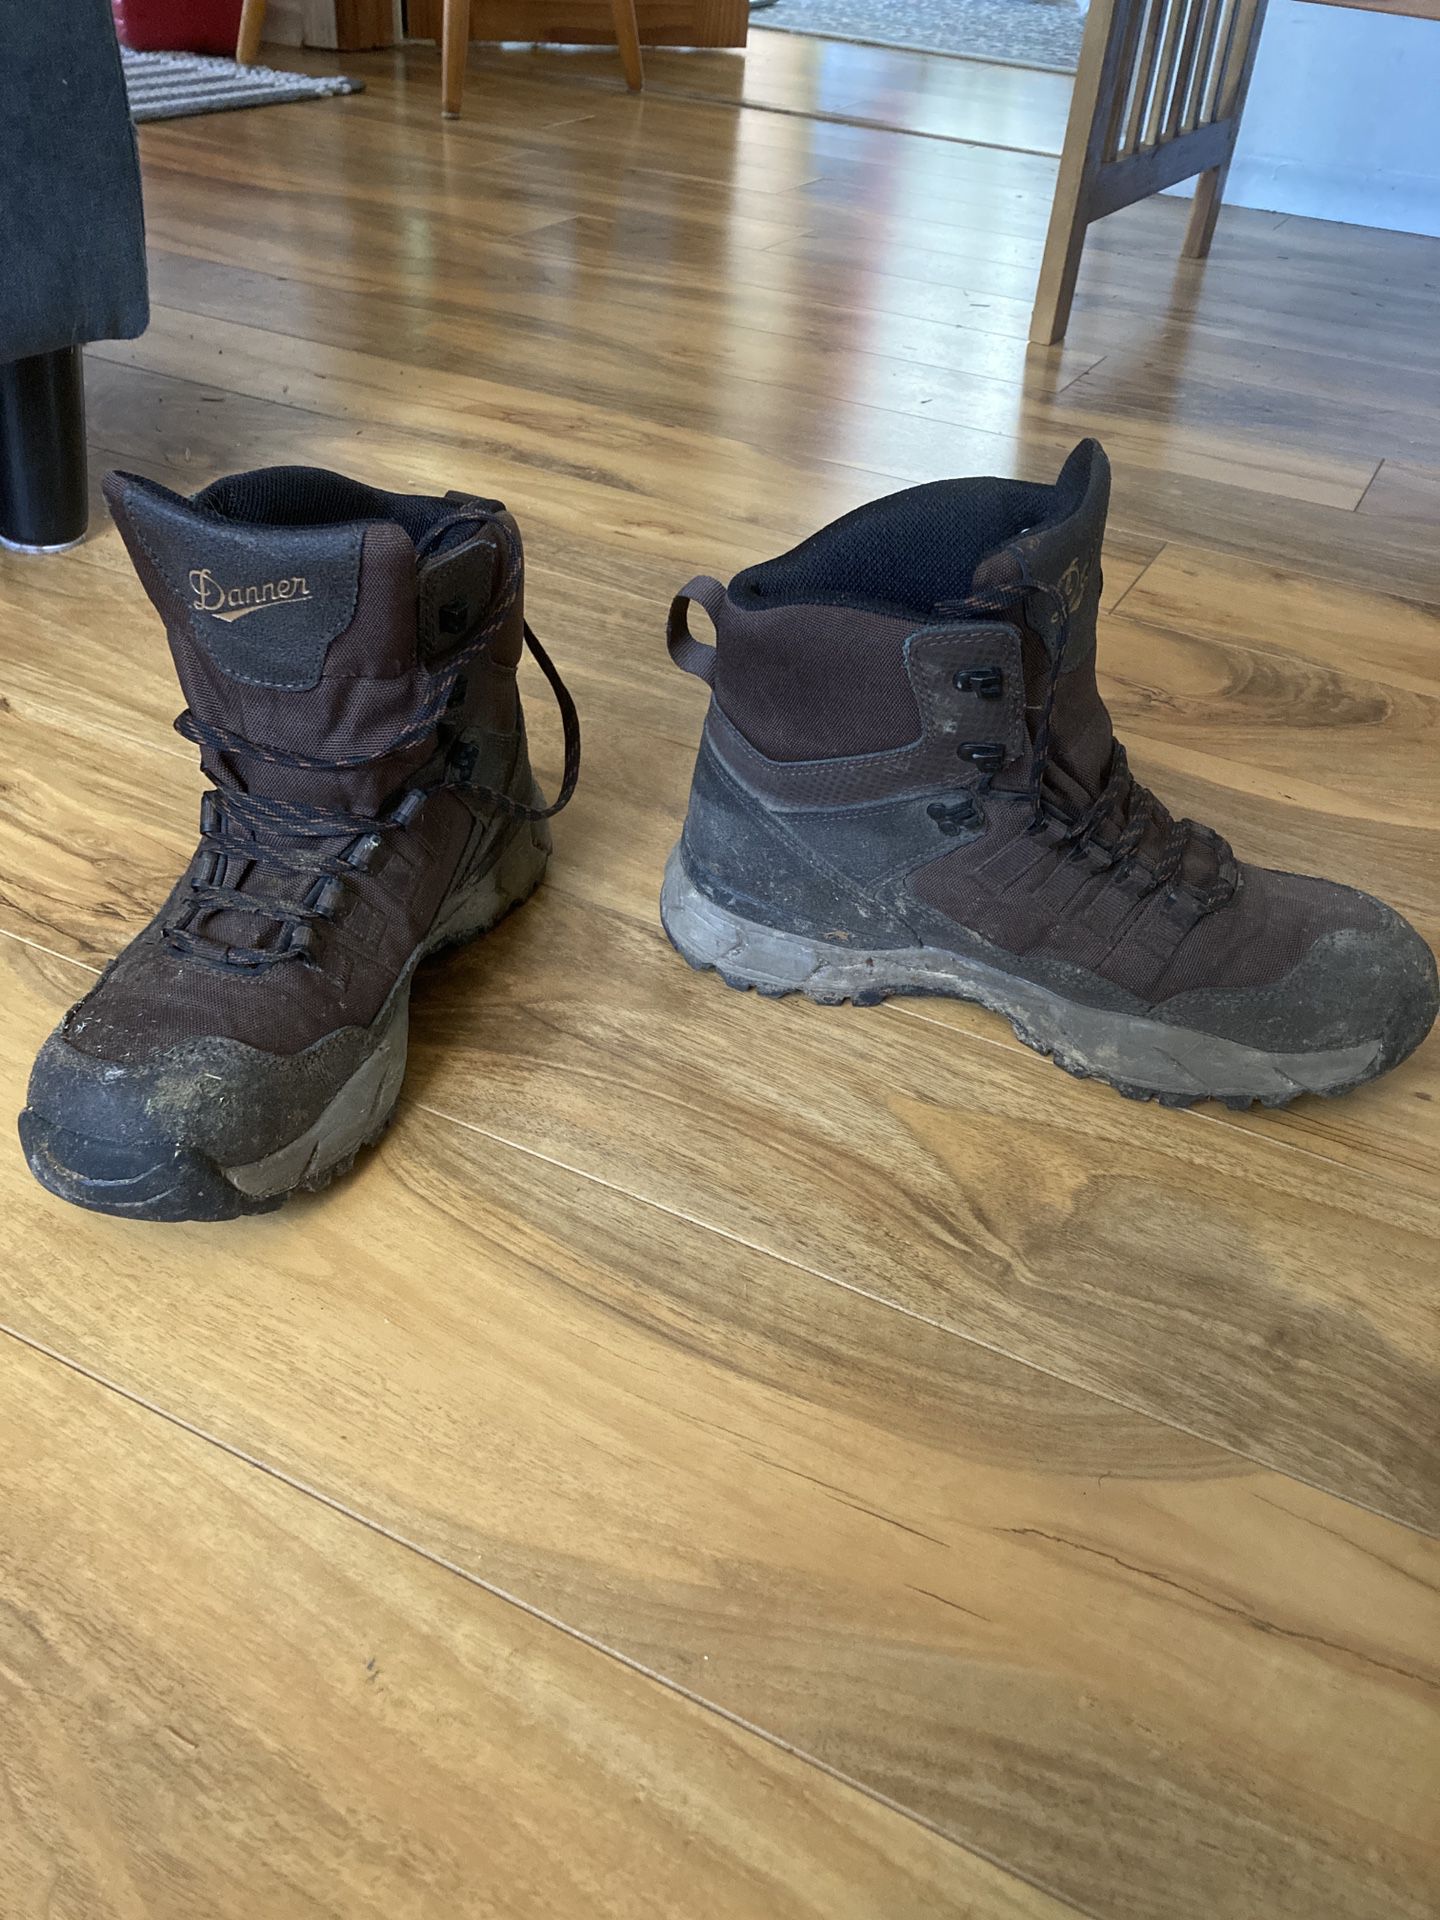 Hiking boots - Danner Vital Trail Size 9.5